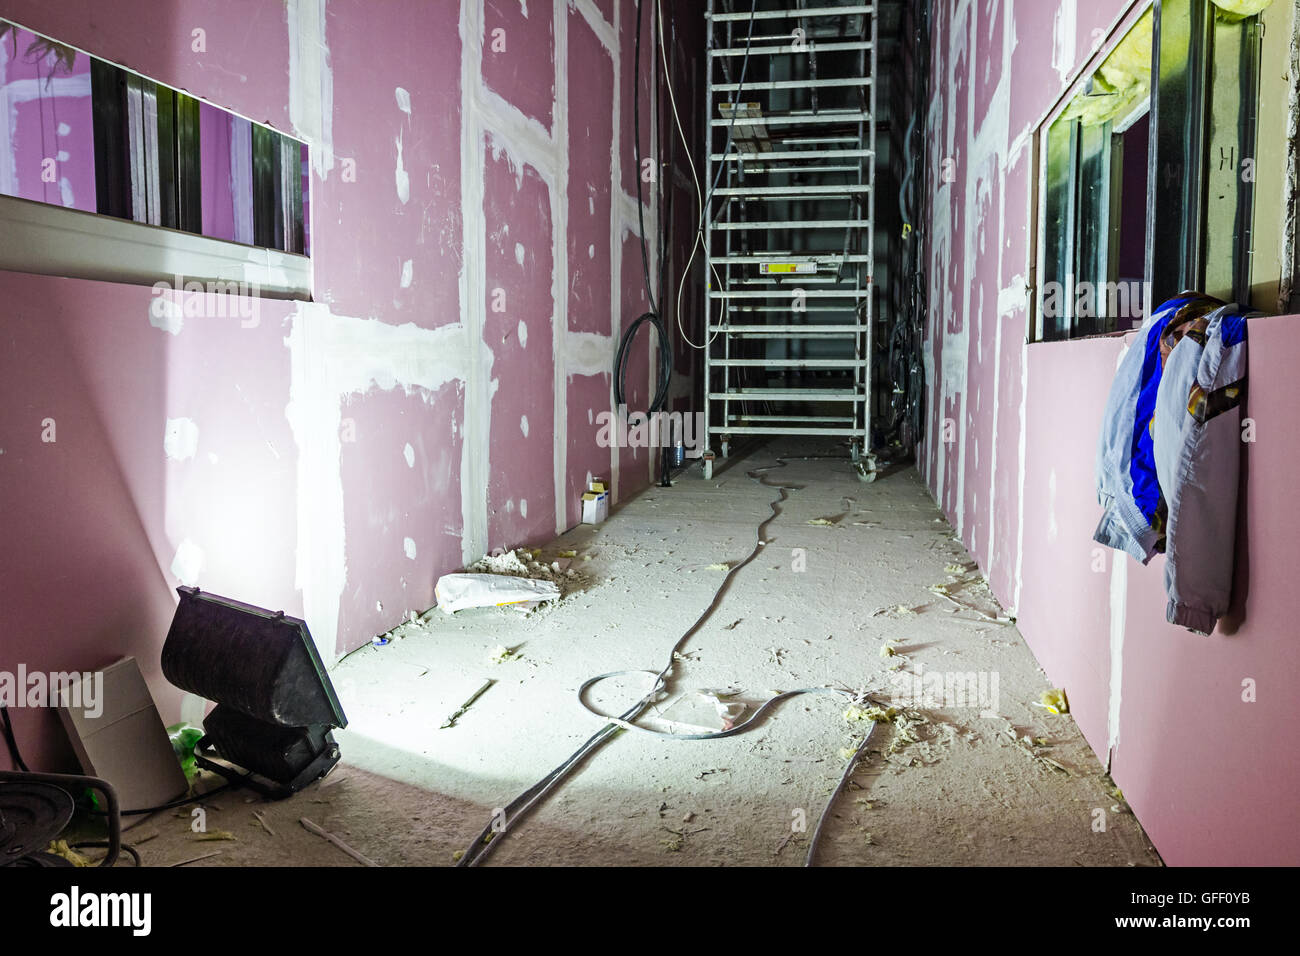 Searchlight is sheds light on mobile scaffold placed in long corridor made of plasterboard. Stock Photo